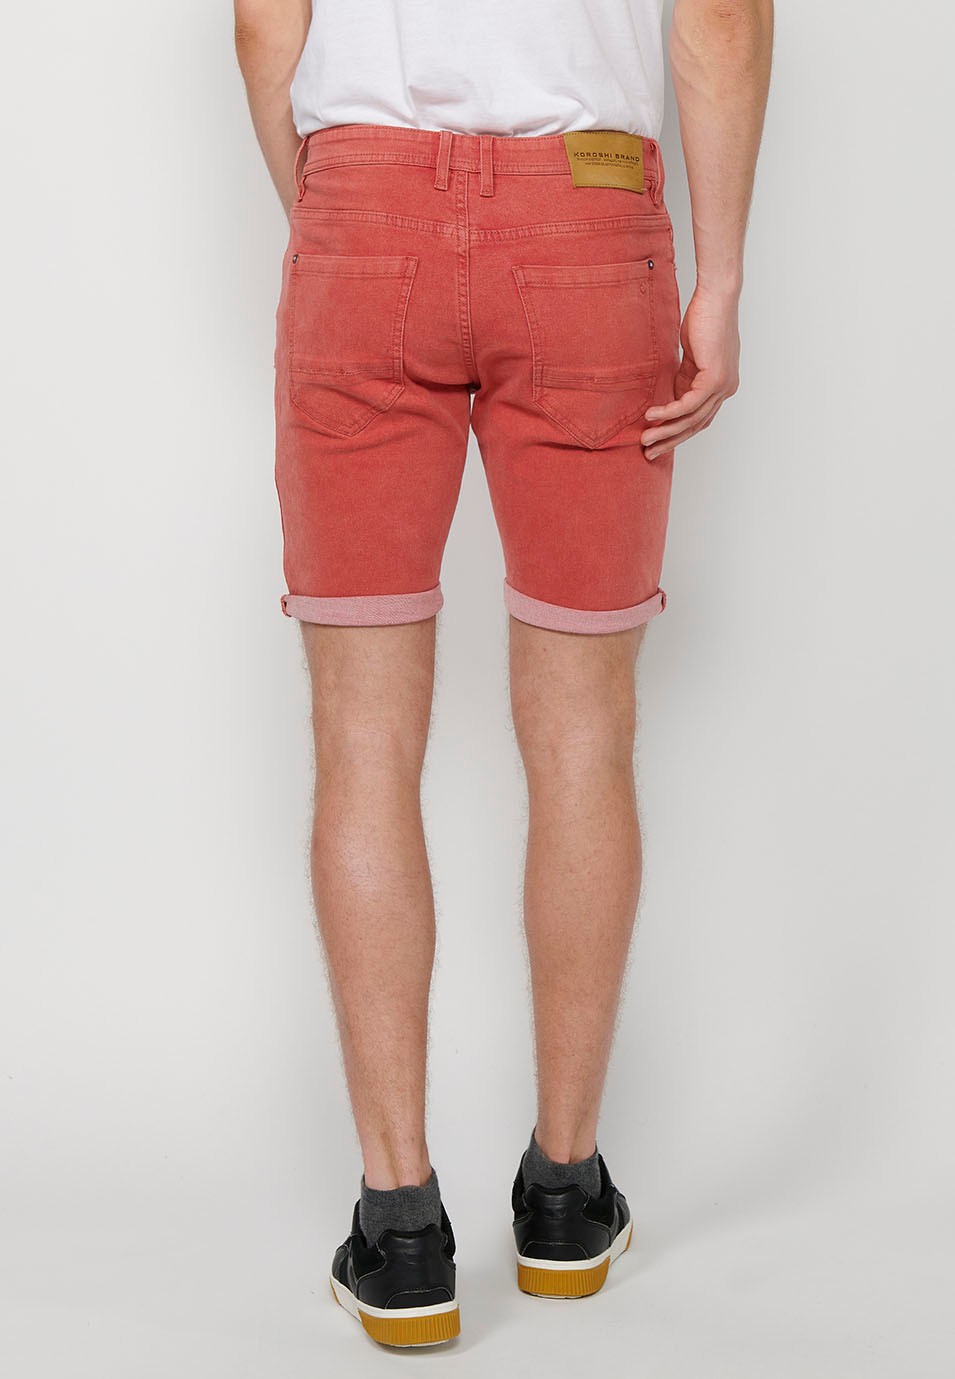 Shorts with a turn-up finish with front zipper and button closure and five pockets, one with a match pocket, in Red for Men 6